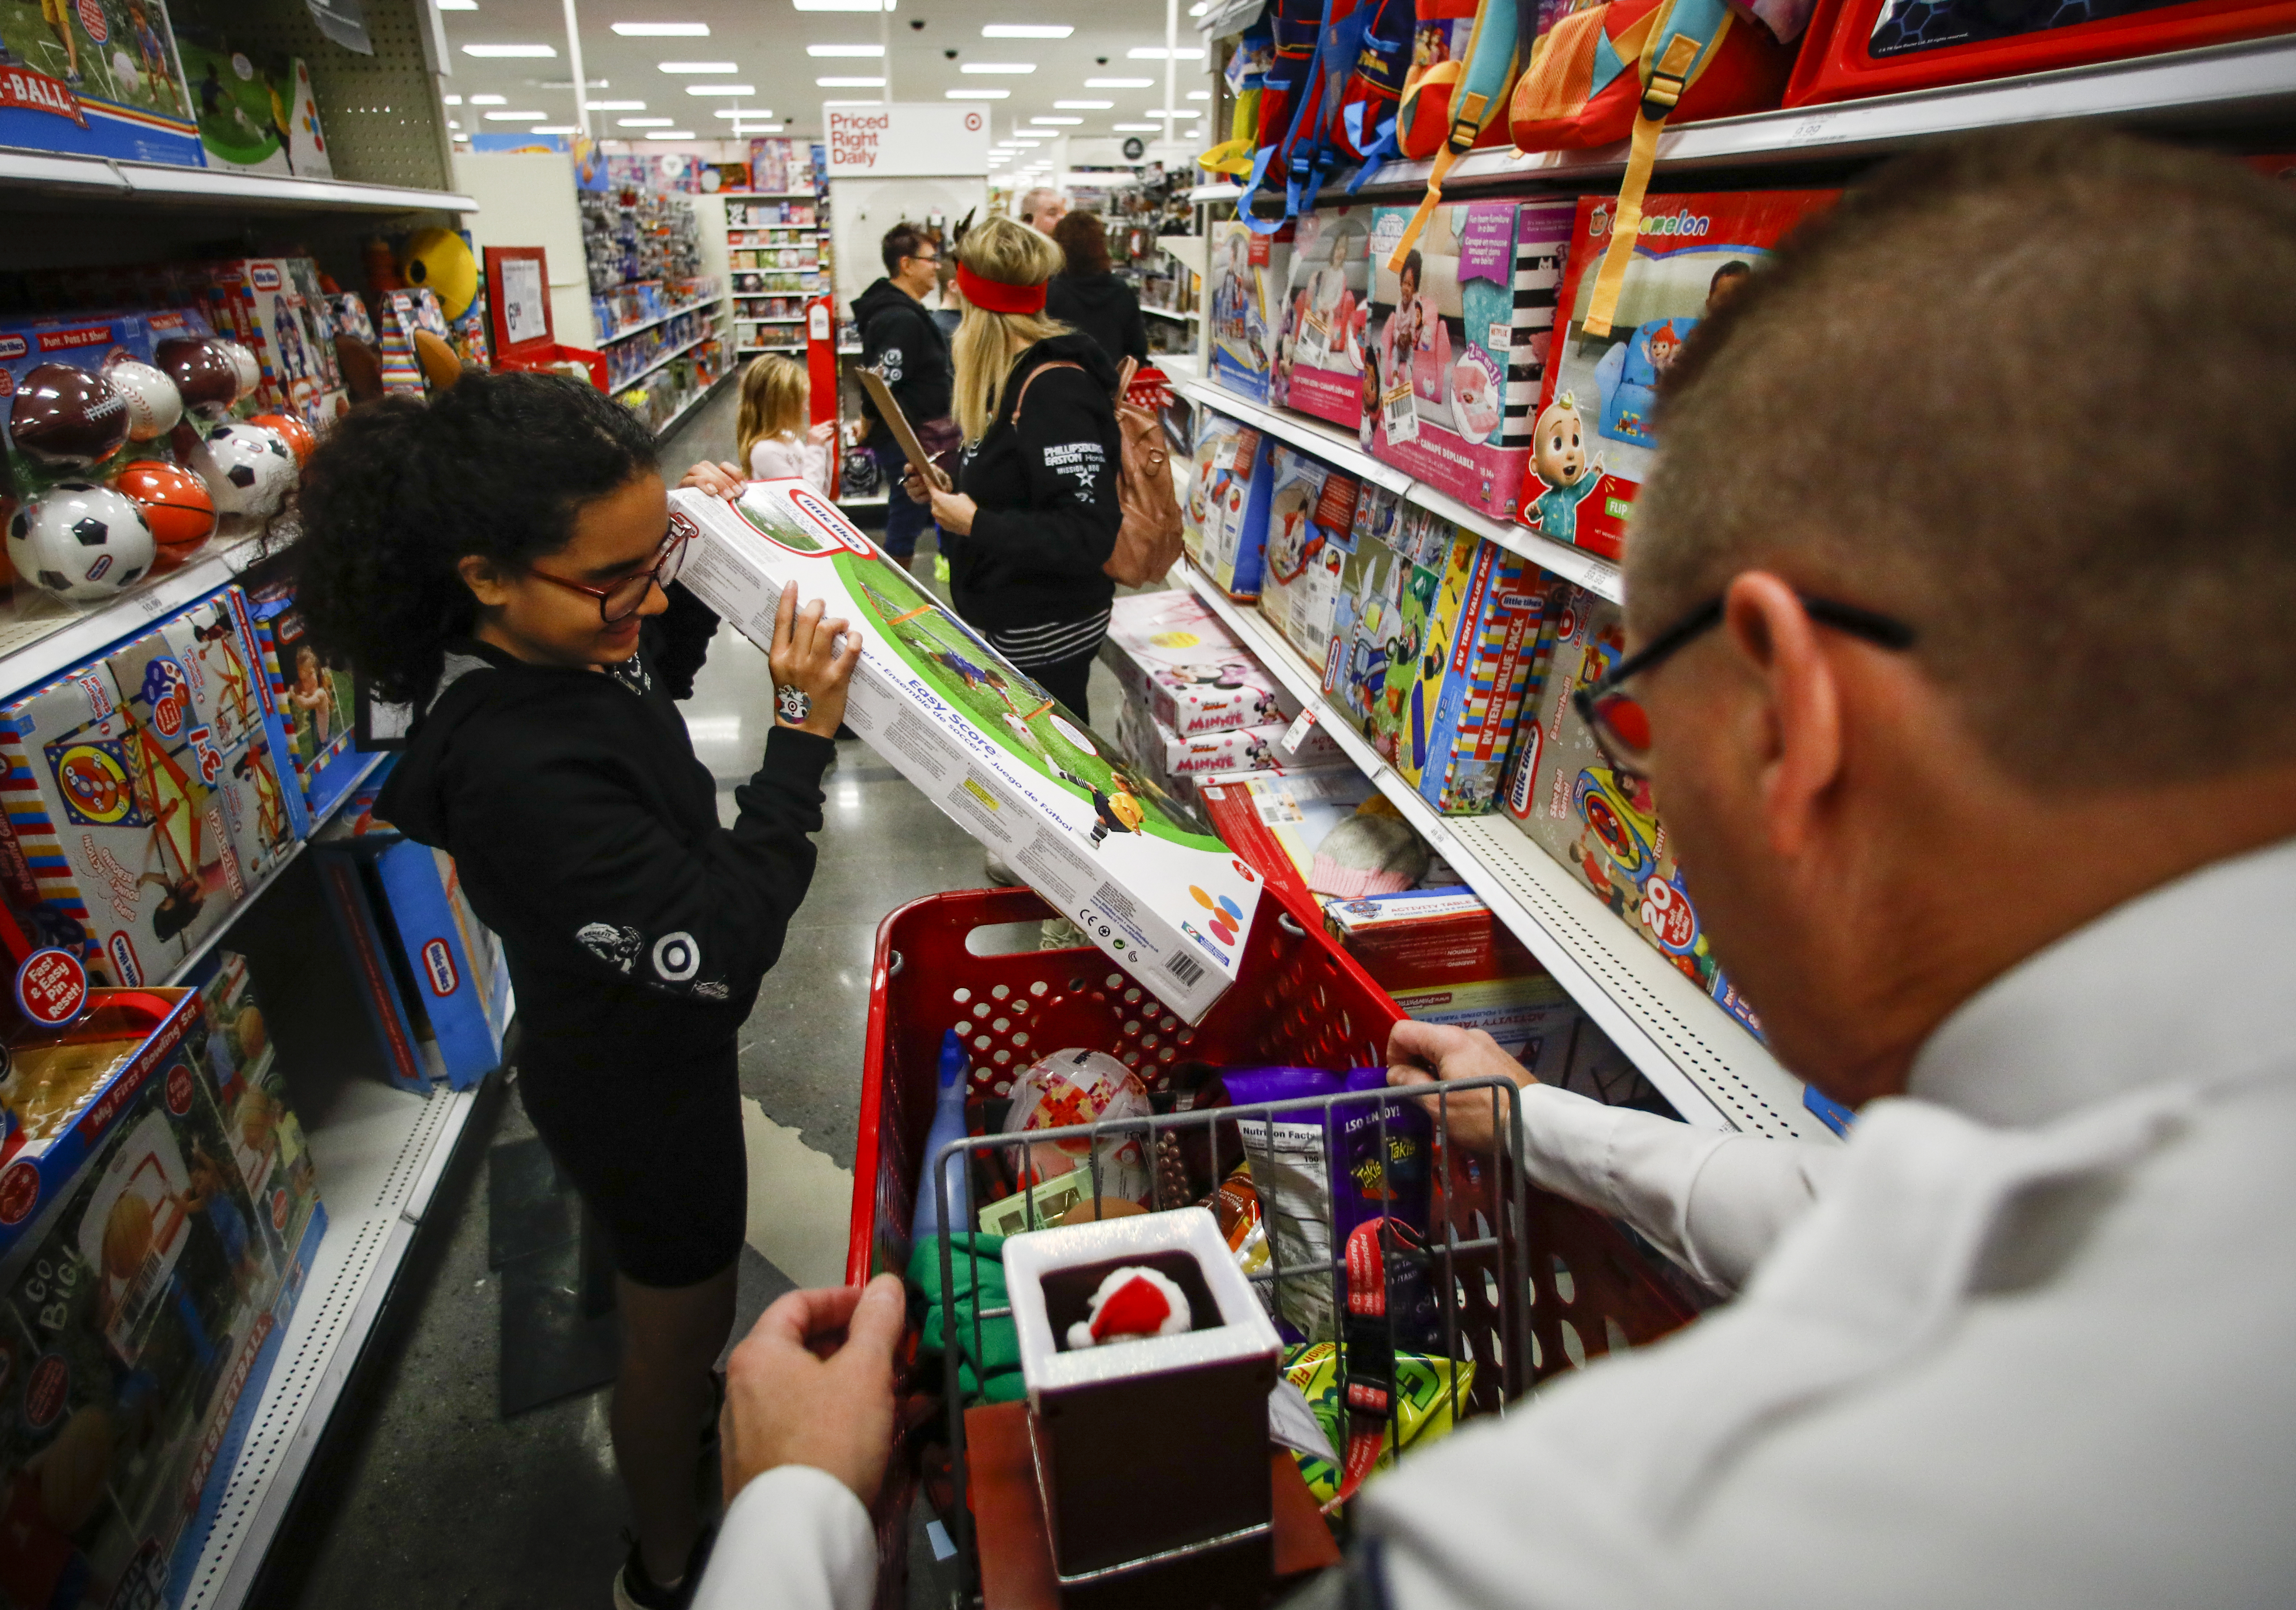 Aniya Bermudez, 12, selects an item to buy as Chief Timothy Koder, right, waits with her cart. She was among 22 children and their families from the Catasauqua Area School District who were accompanied by Lehigh-Northampton Airport Authority Police Department during the shopping spree Saturday, Dec. 3, 2022, at Target in Hanover Township, Lehigh County. 